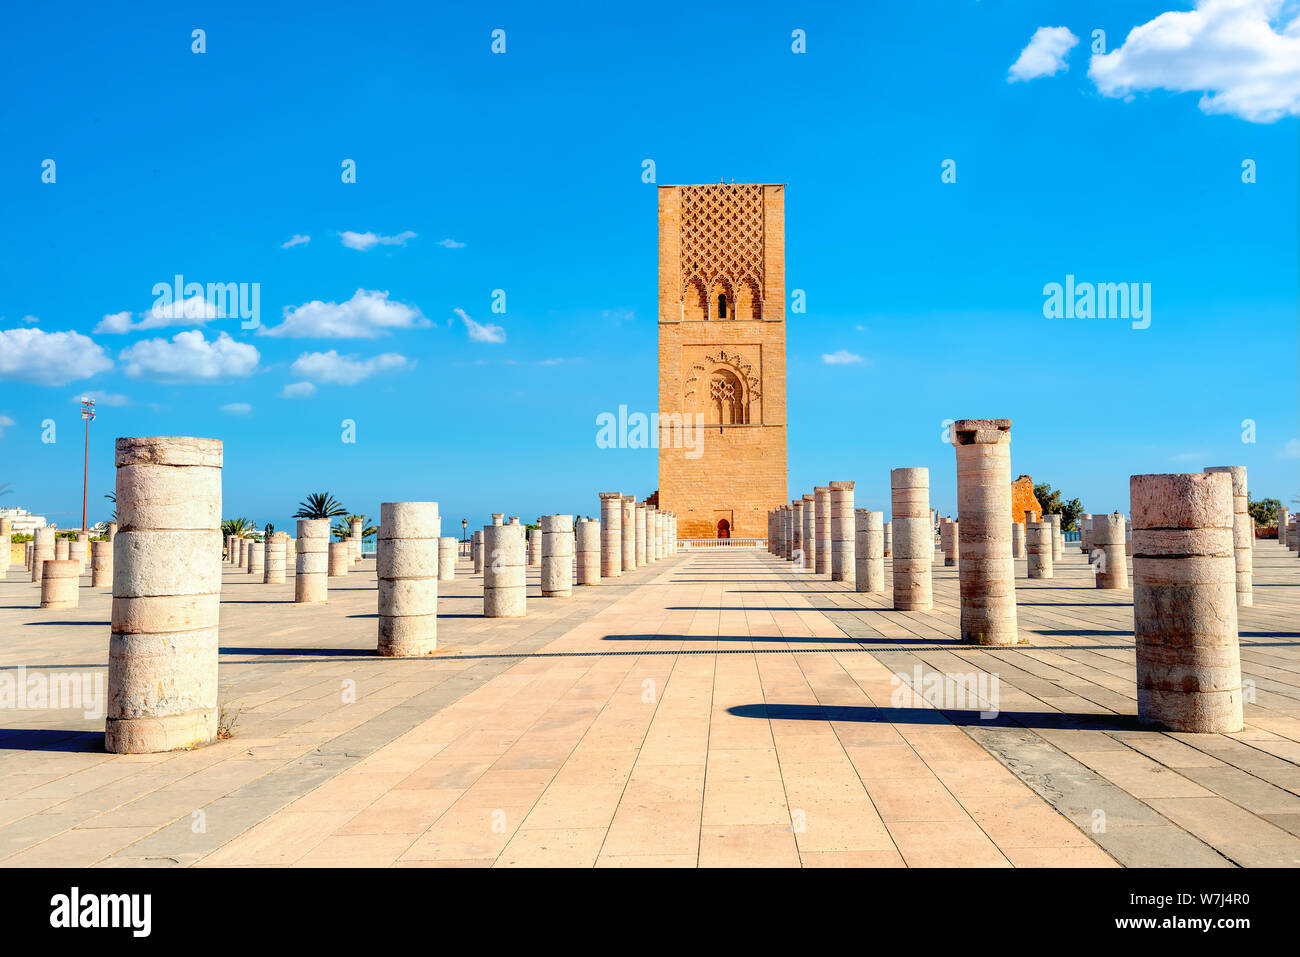 Minaret of Hassan tower, unfinished old mosque in courtyard with stone columns, famous historical and touristic place in Rabat, Morocco, Africa Stock Photo